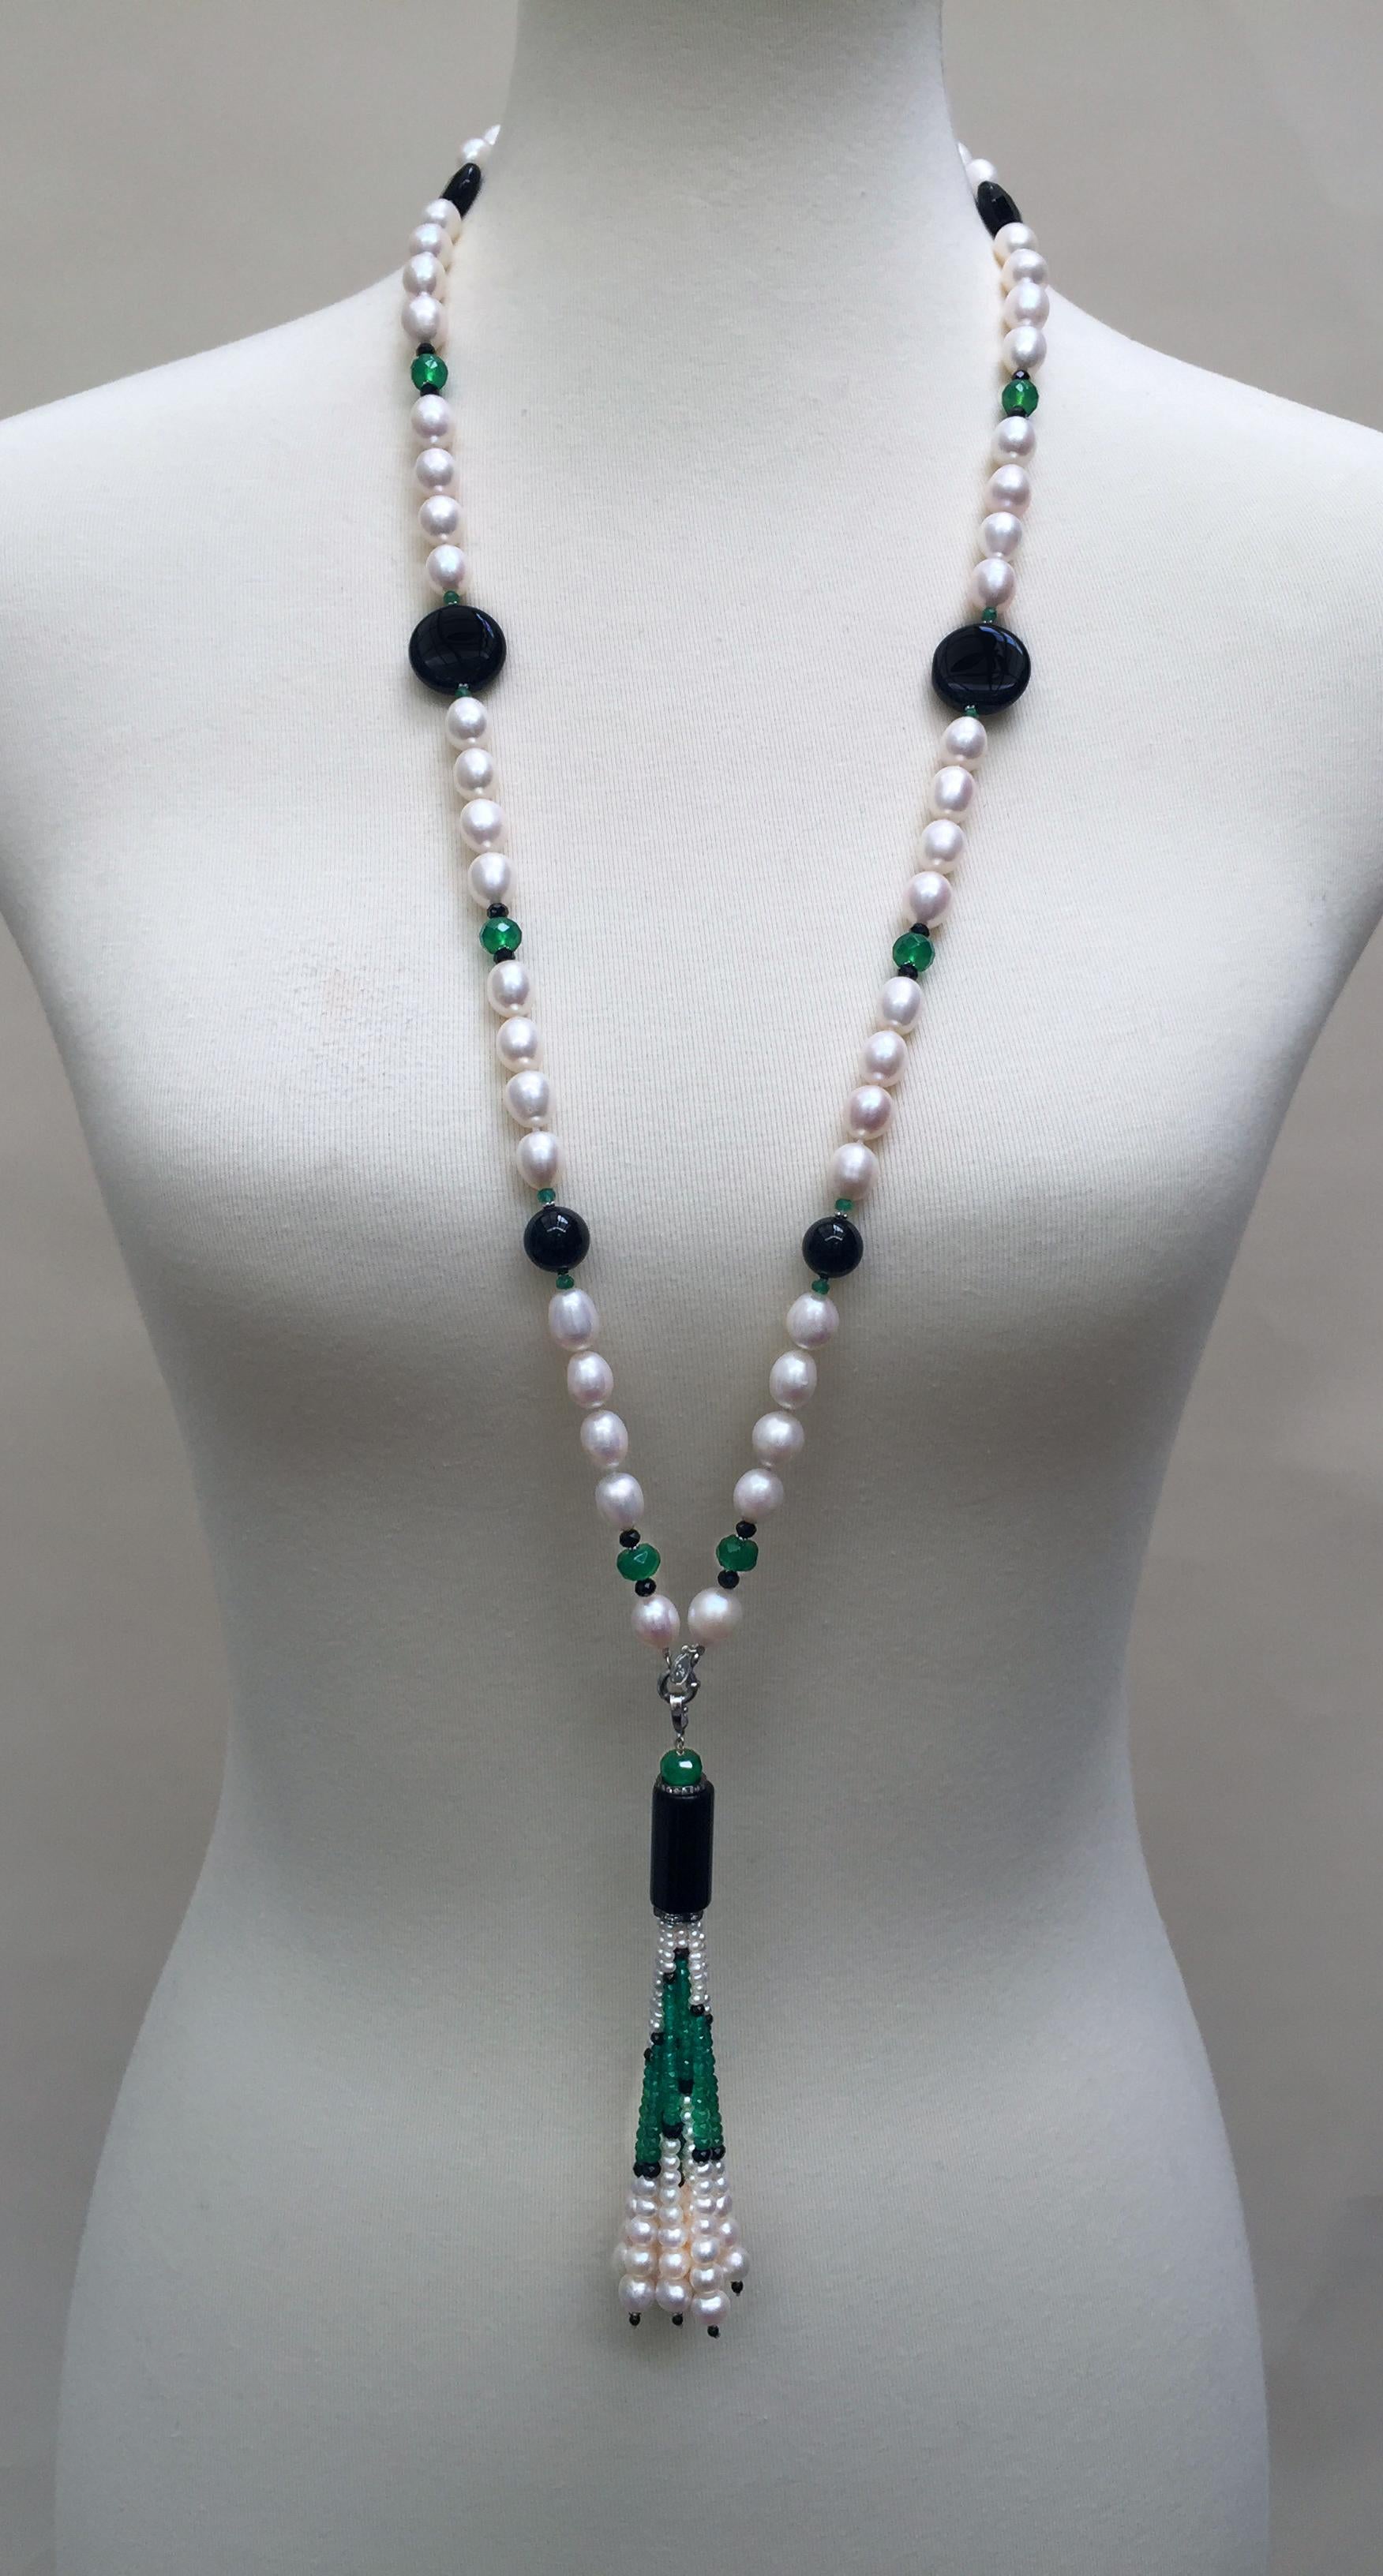 Artist Black Onyx, Jade and Pearl Necklace with Tassel and 14 Karat White Gold Clasp